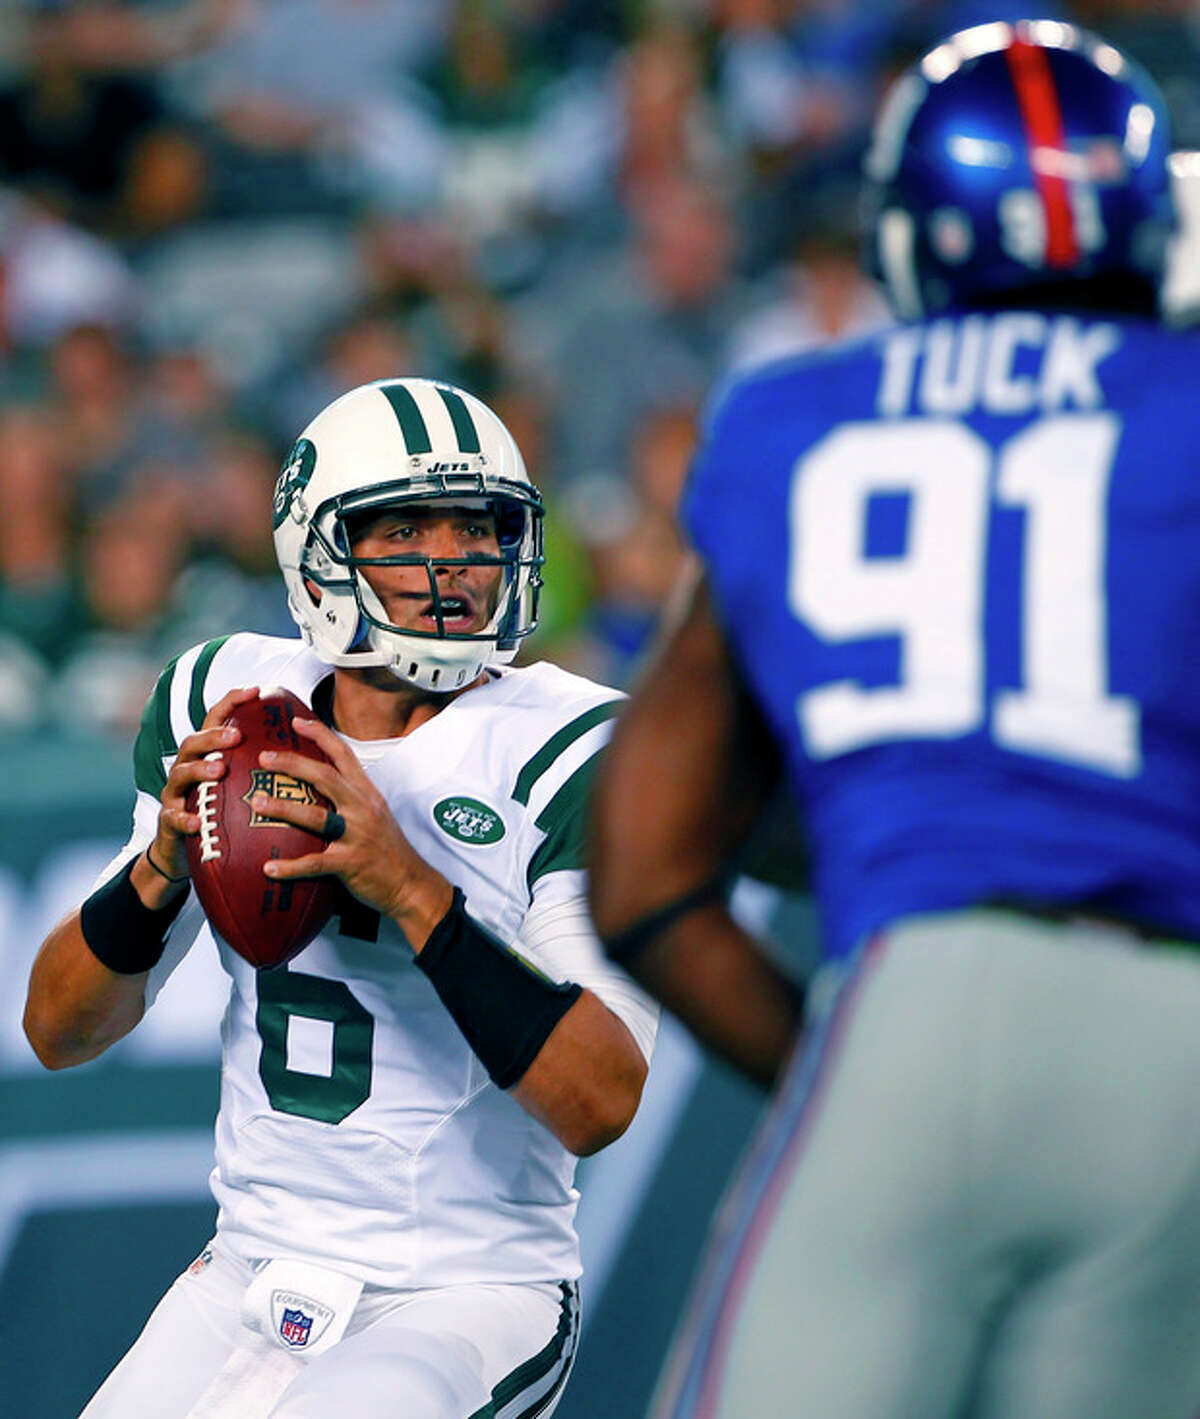 New York Jets quarterback Mark Sanchez (6) passes under pressure from New York Giants defensive end Justin Tuck (91) during the first half of a preseason NFL football game on Saturday, Aug. 18, 2012, in East Rutherford, N.J. (AP Photo/Rich Schultz)